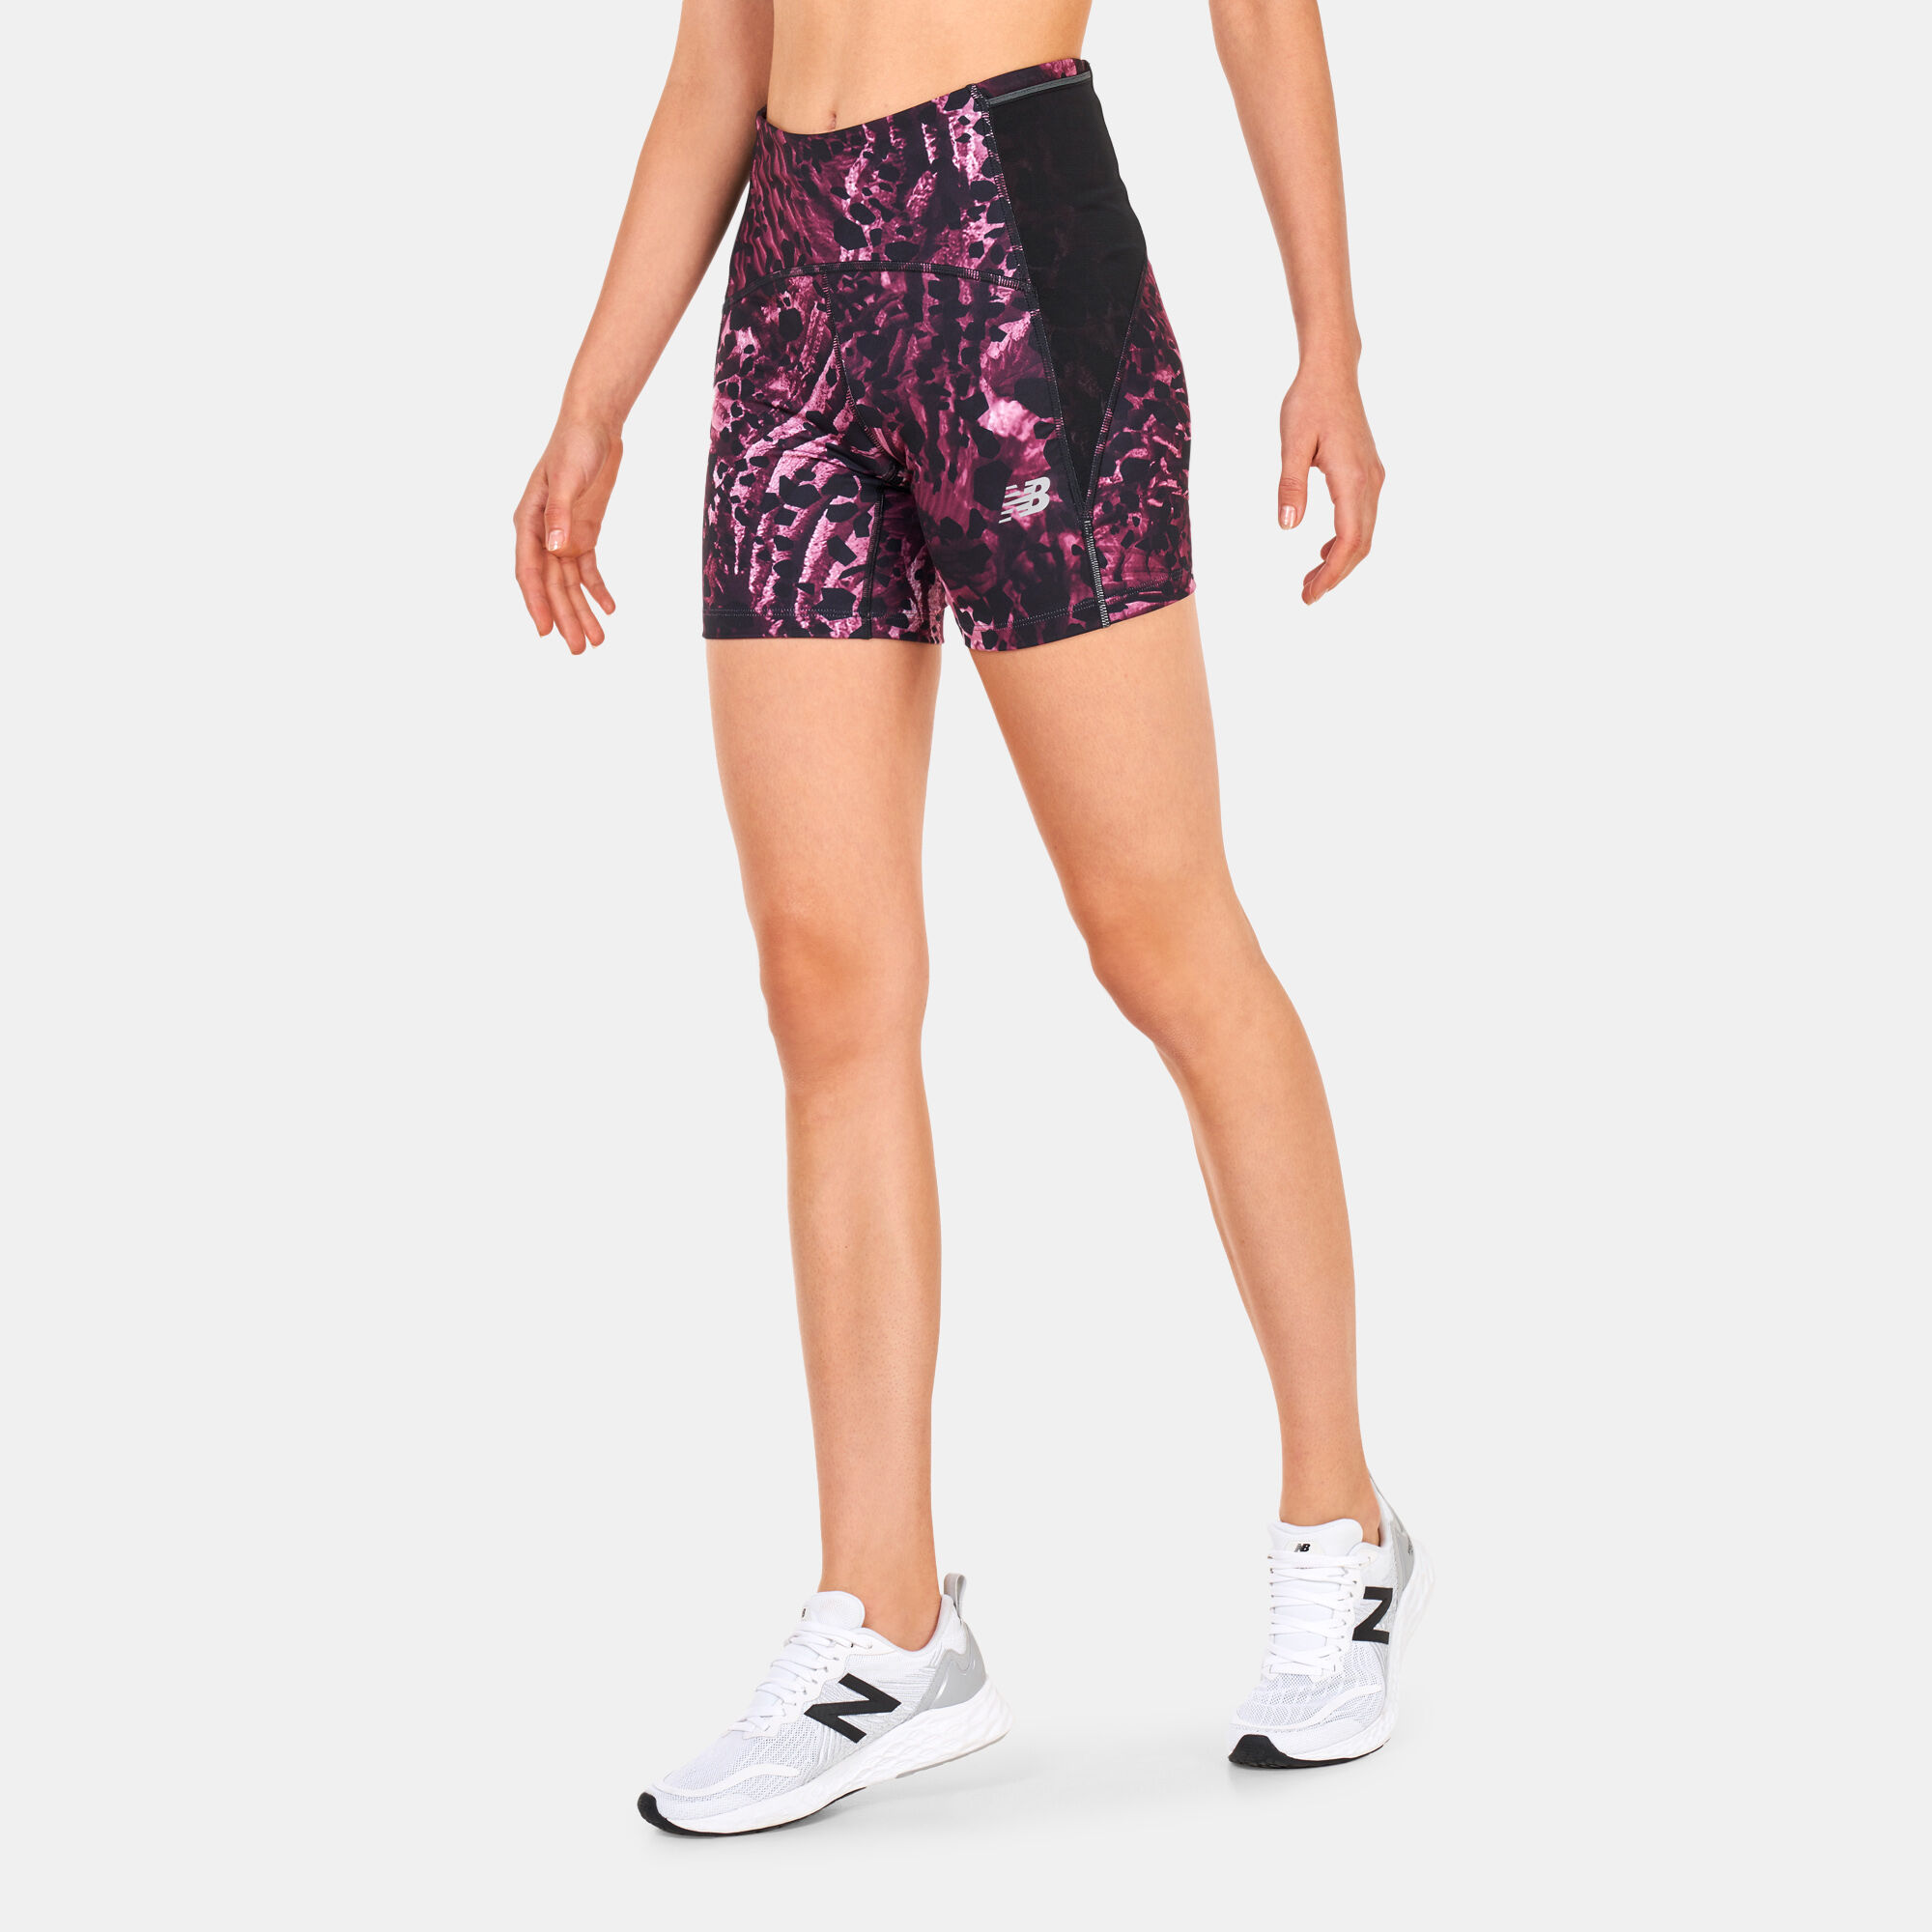 Impact Run fitted Shorts